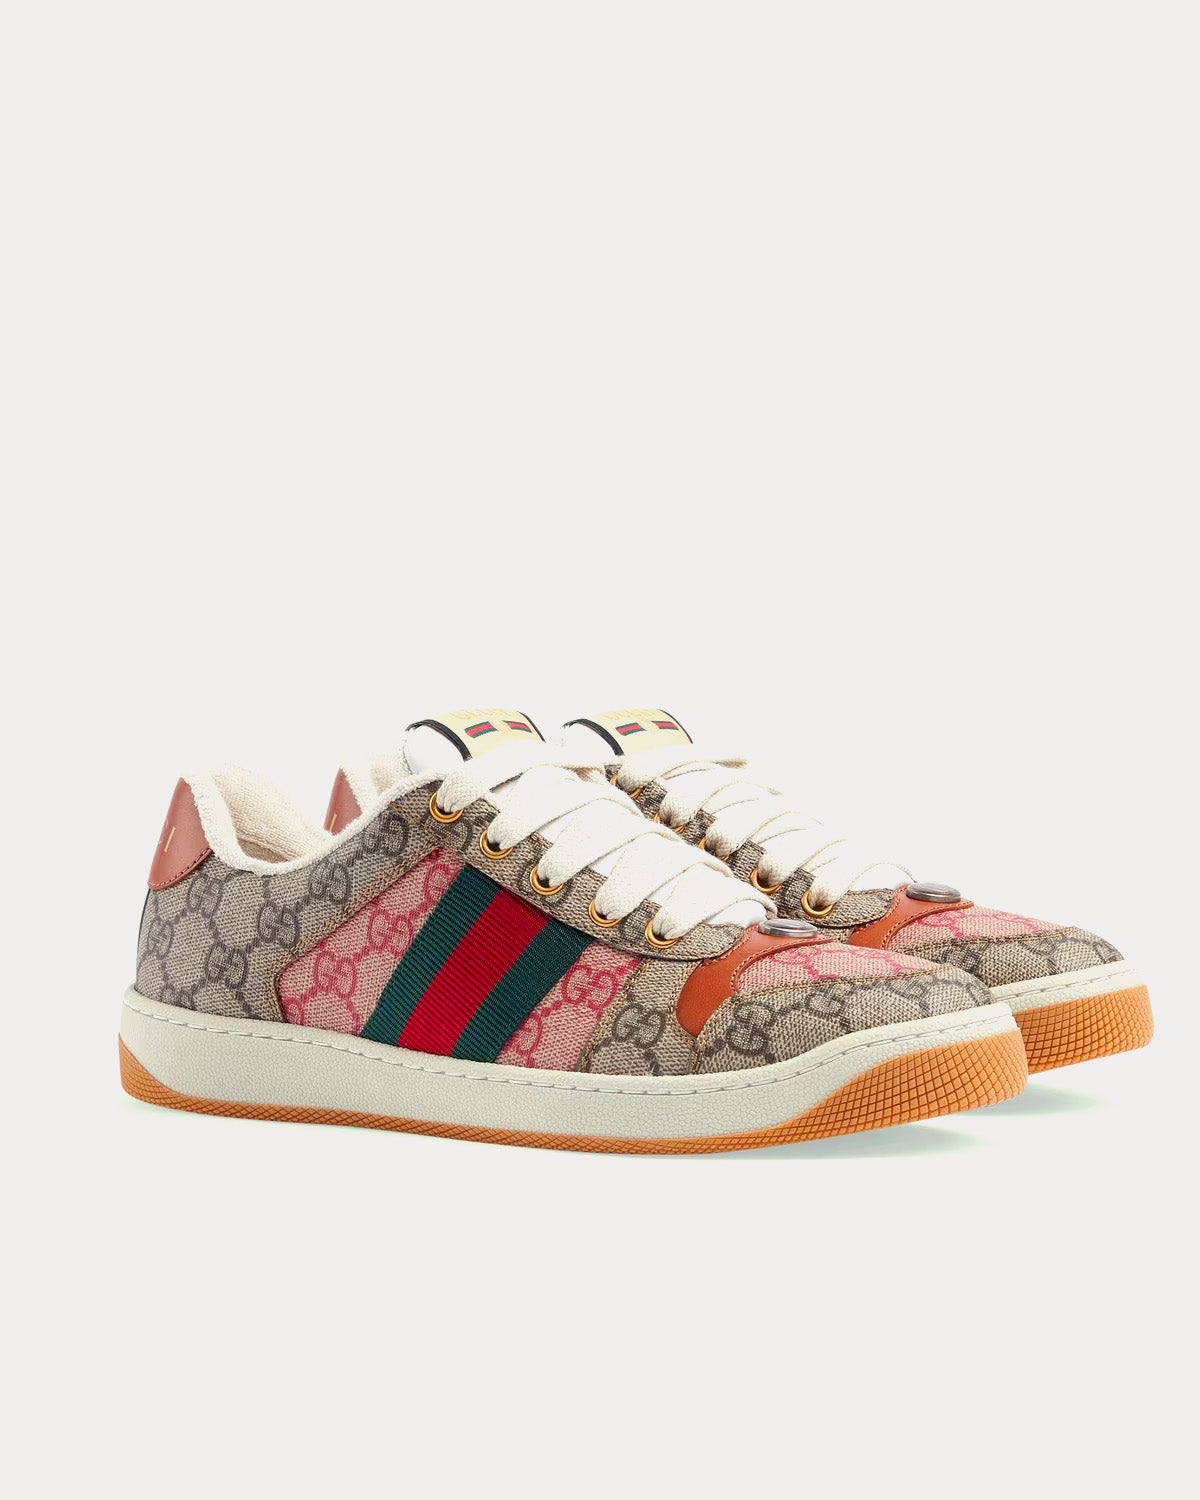 Gucci - Screener GG Supreme Canvas & Leather Beige Low Top Sneakers